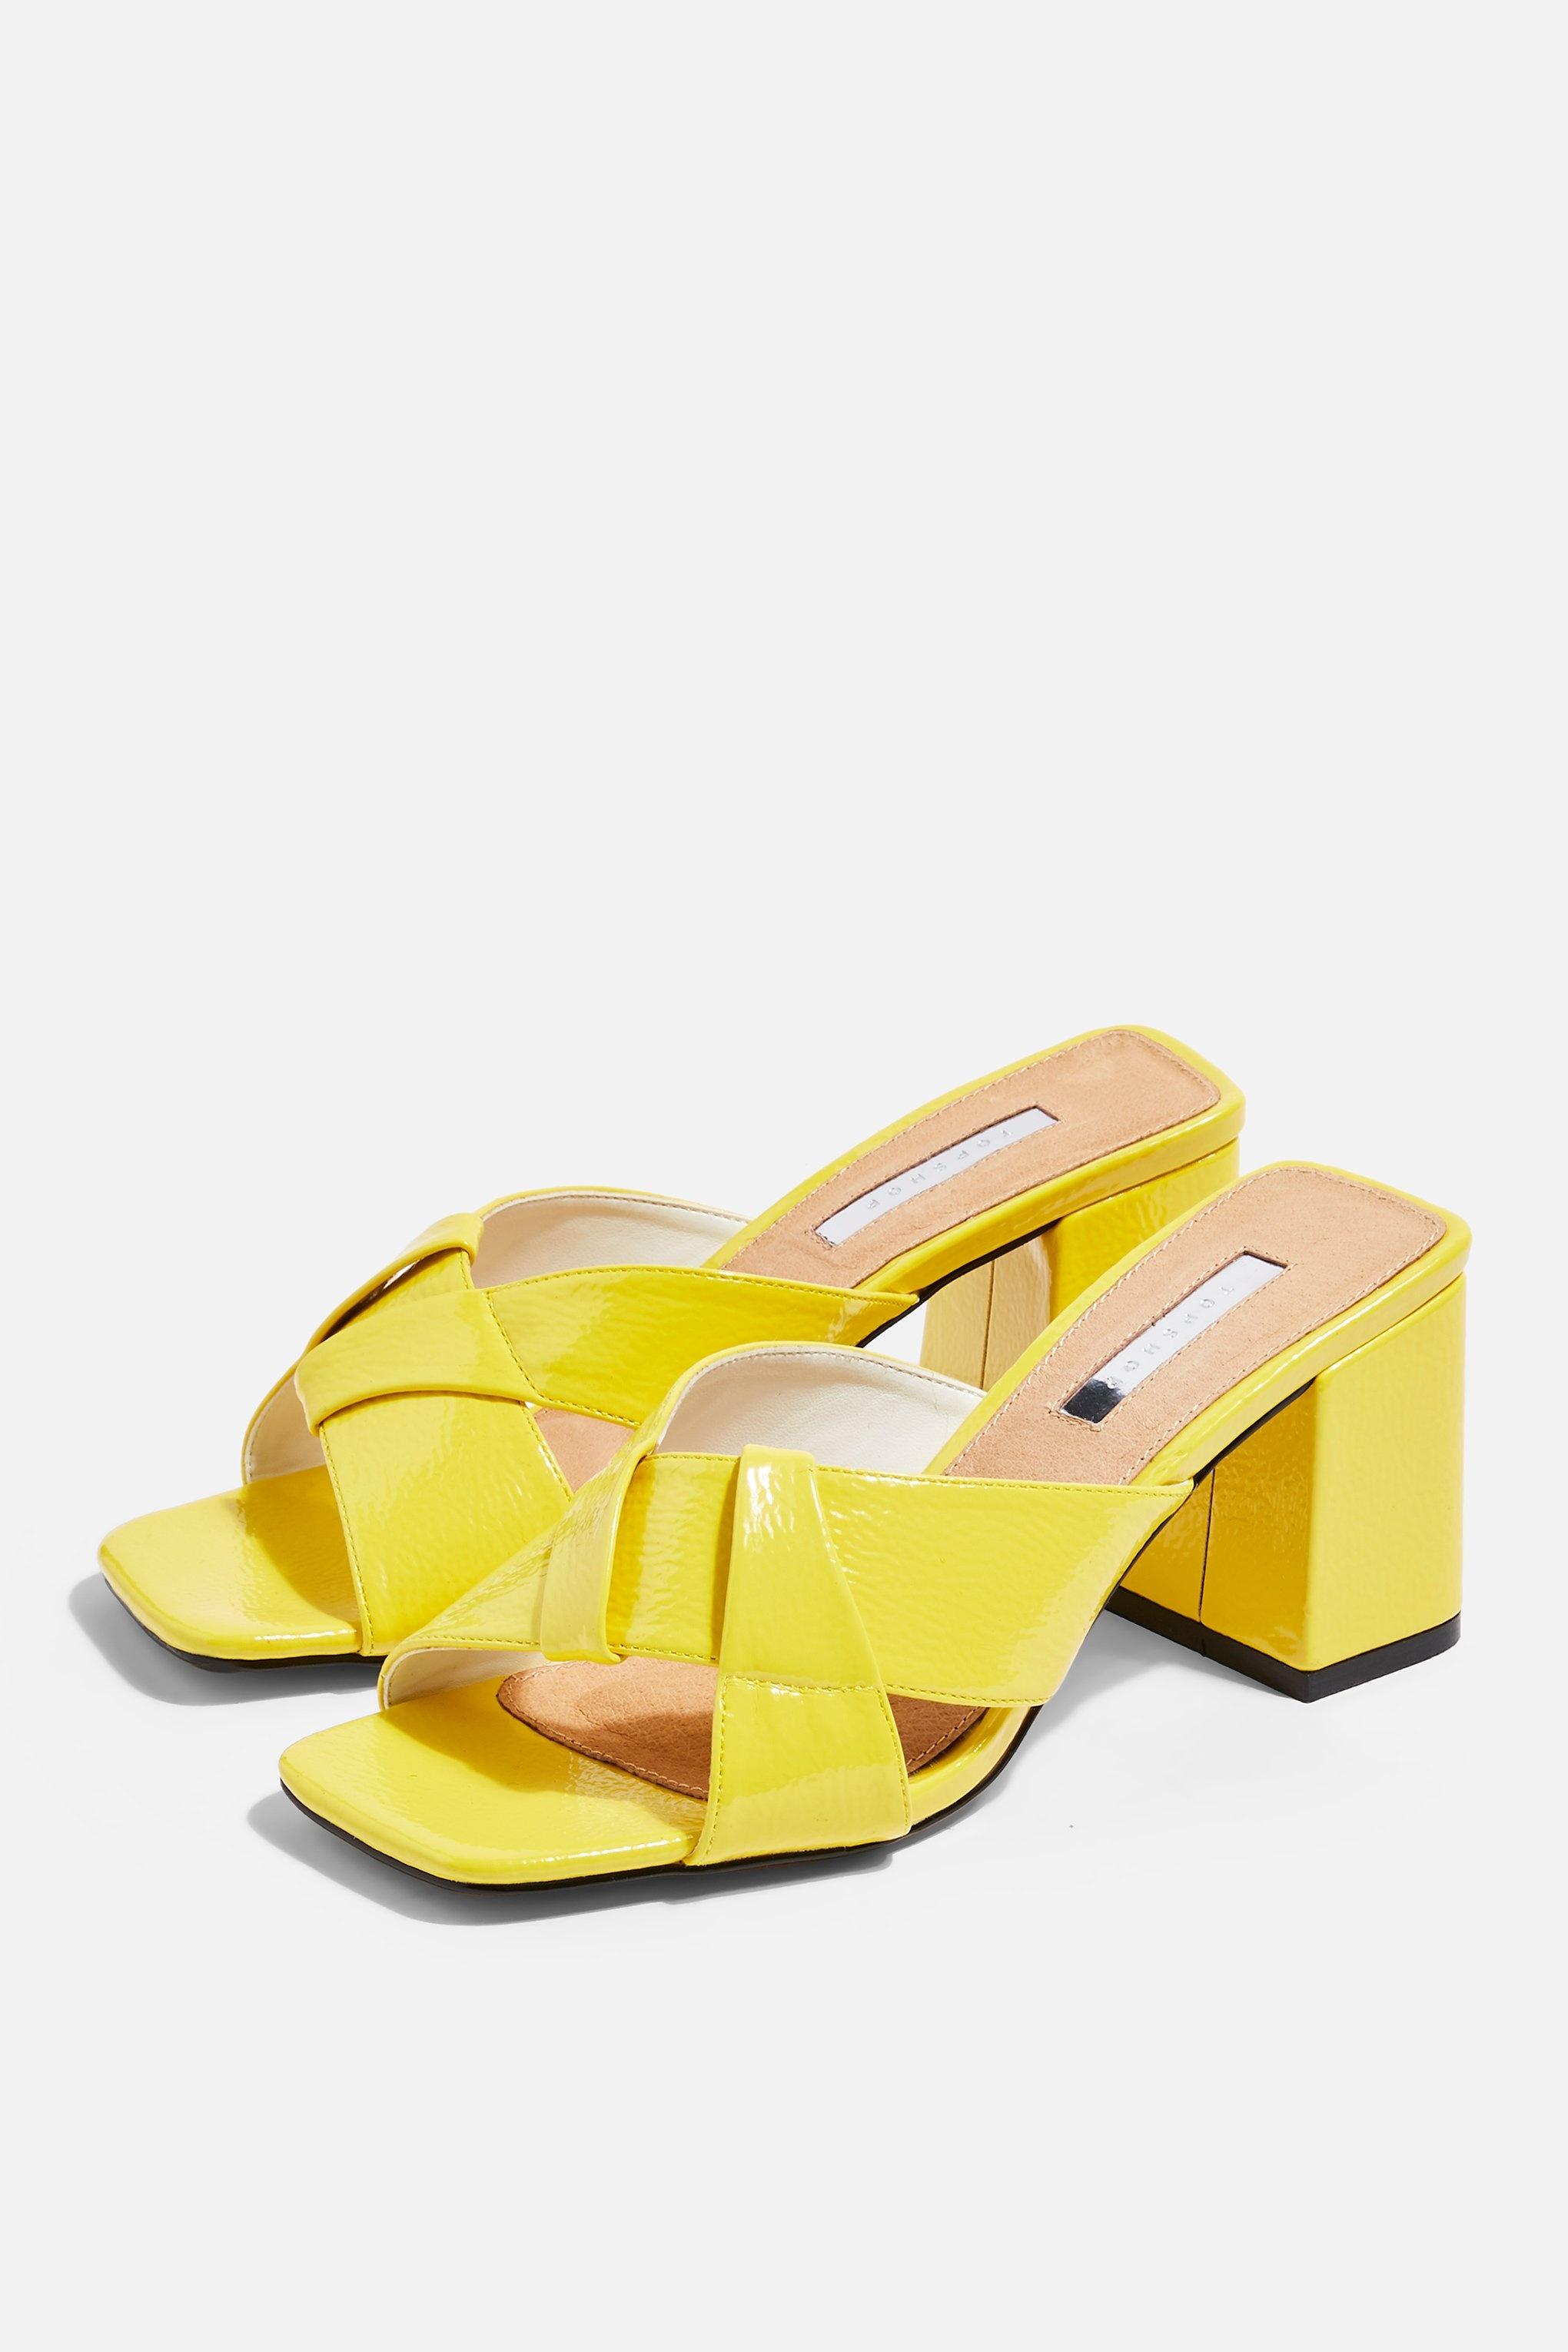 topshop yellow mules